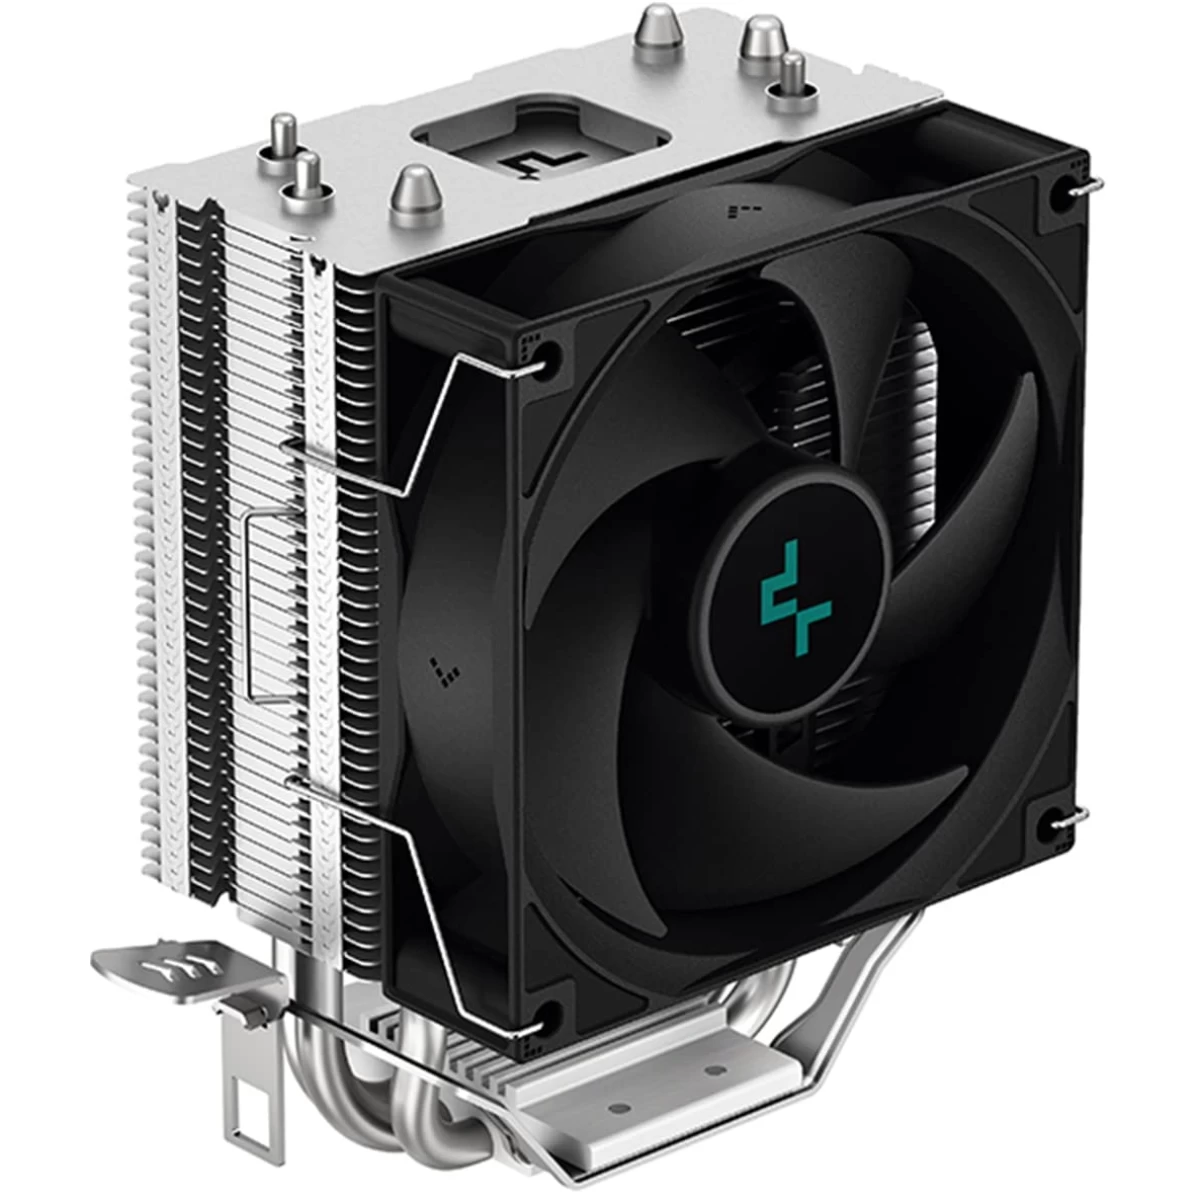 DEEPCOOL GAMMAXX AG300 CPU Air Cooler 3 Heatpipes Full Nickel Plating PWM Cooling Fan For Intel & AMD